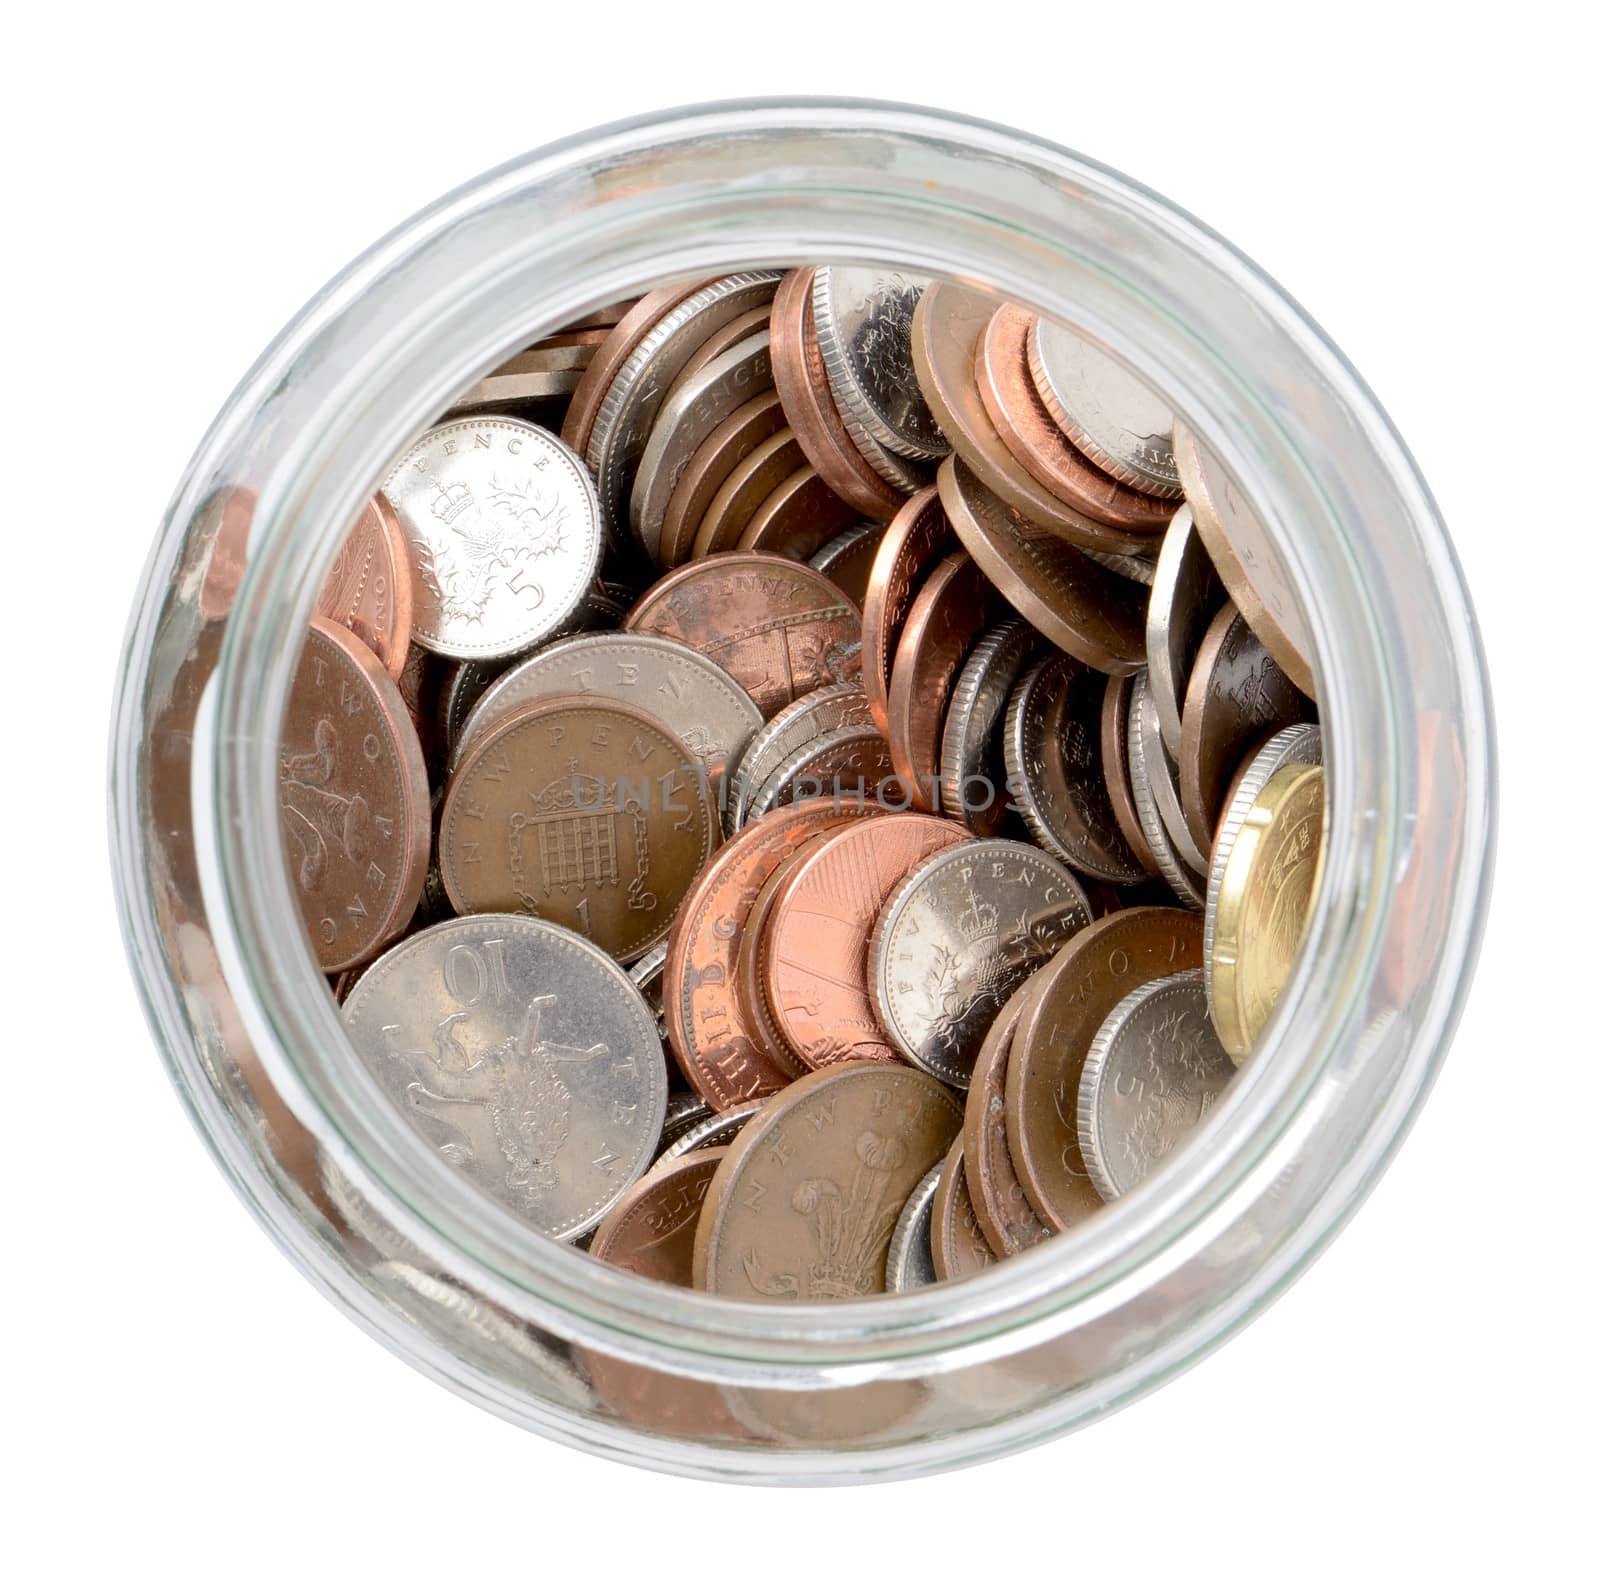 using the rainy day fund, coins spilling out of a jar